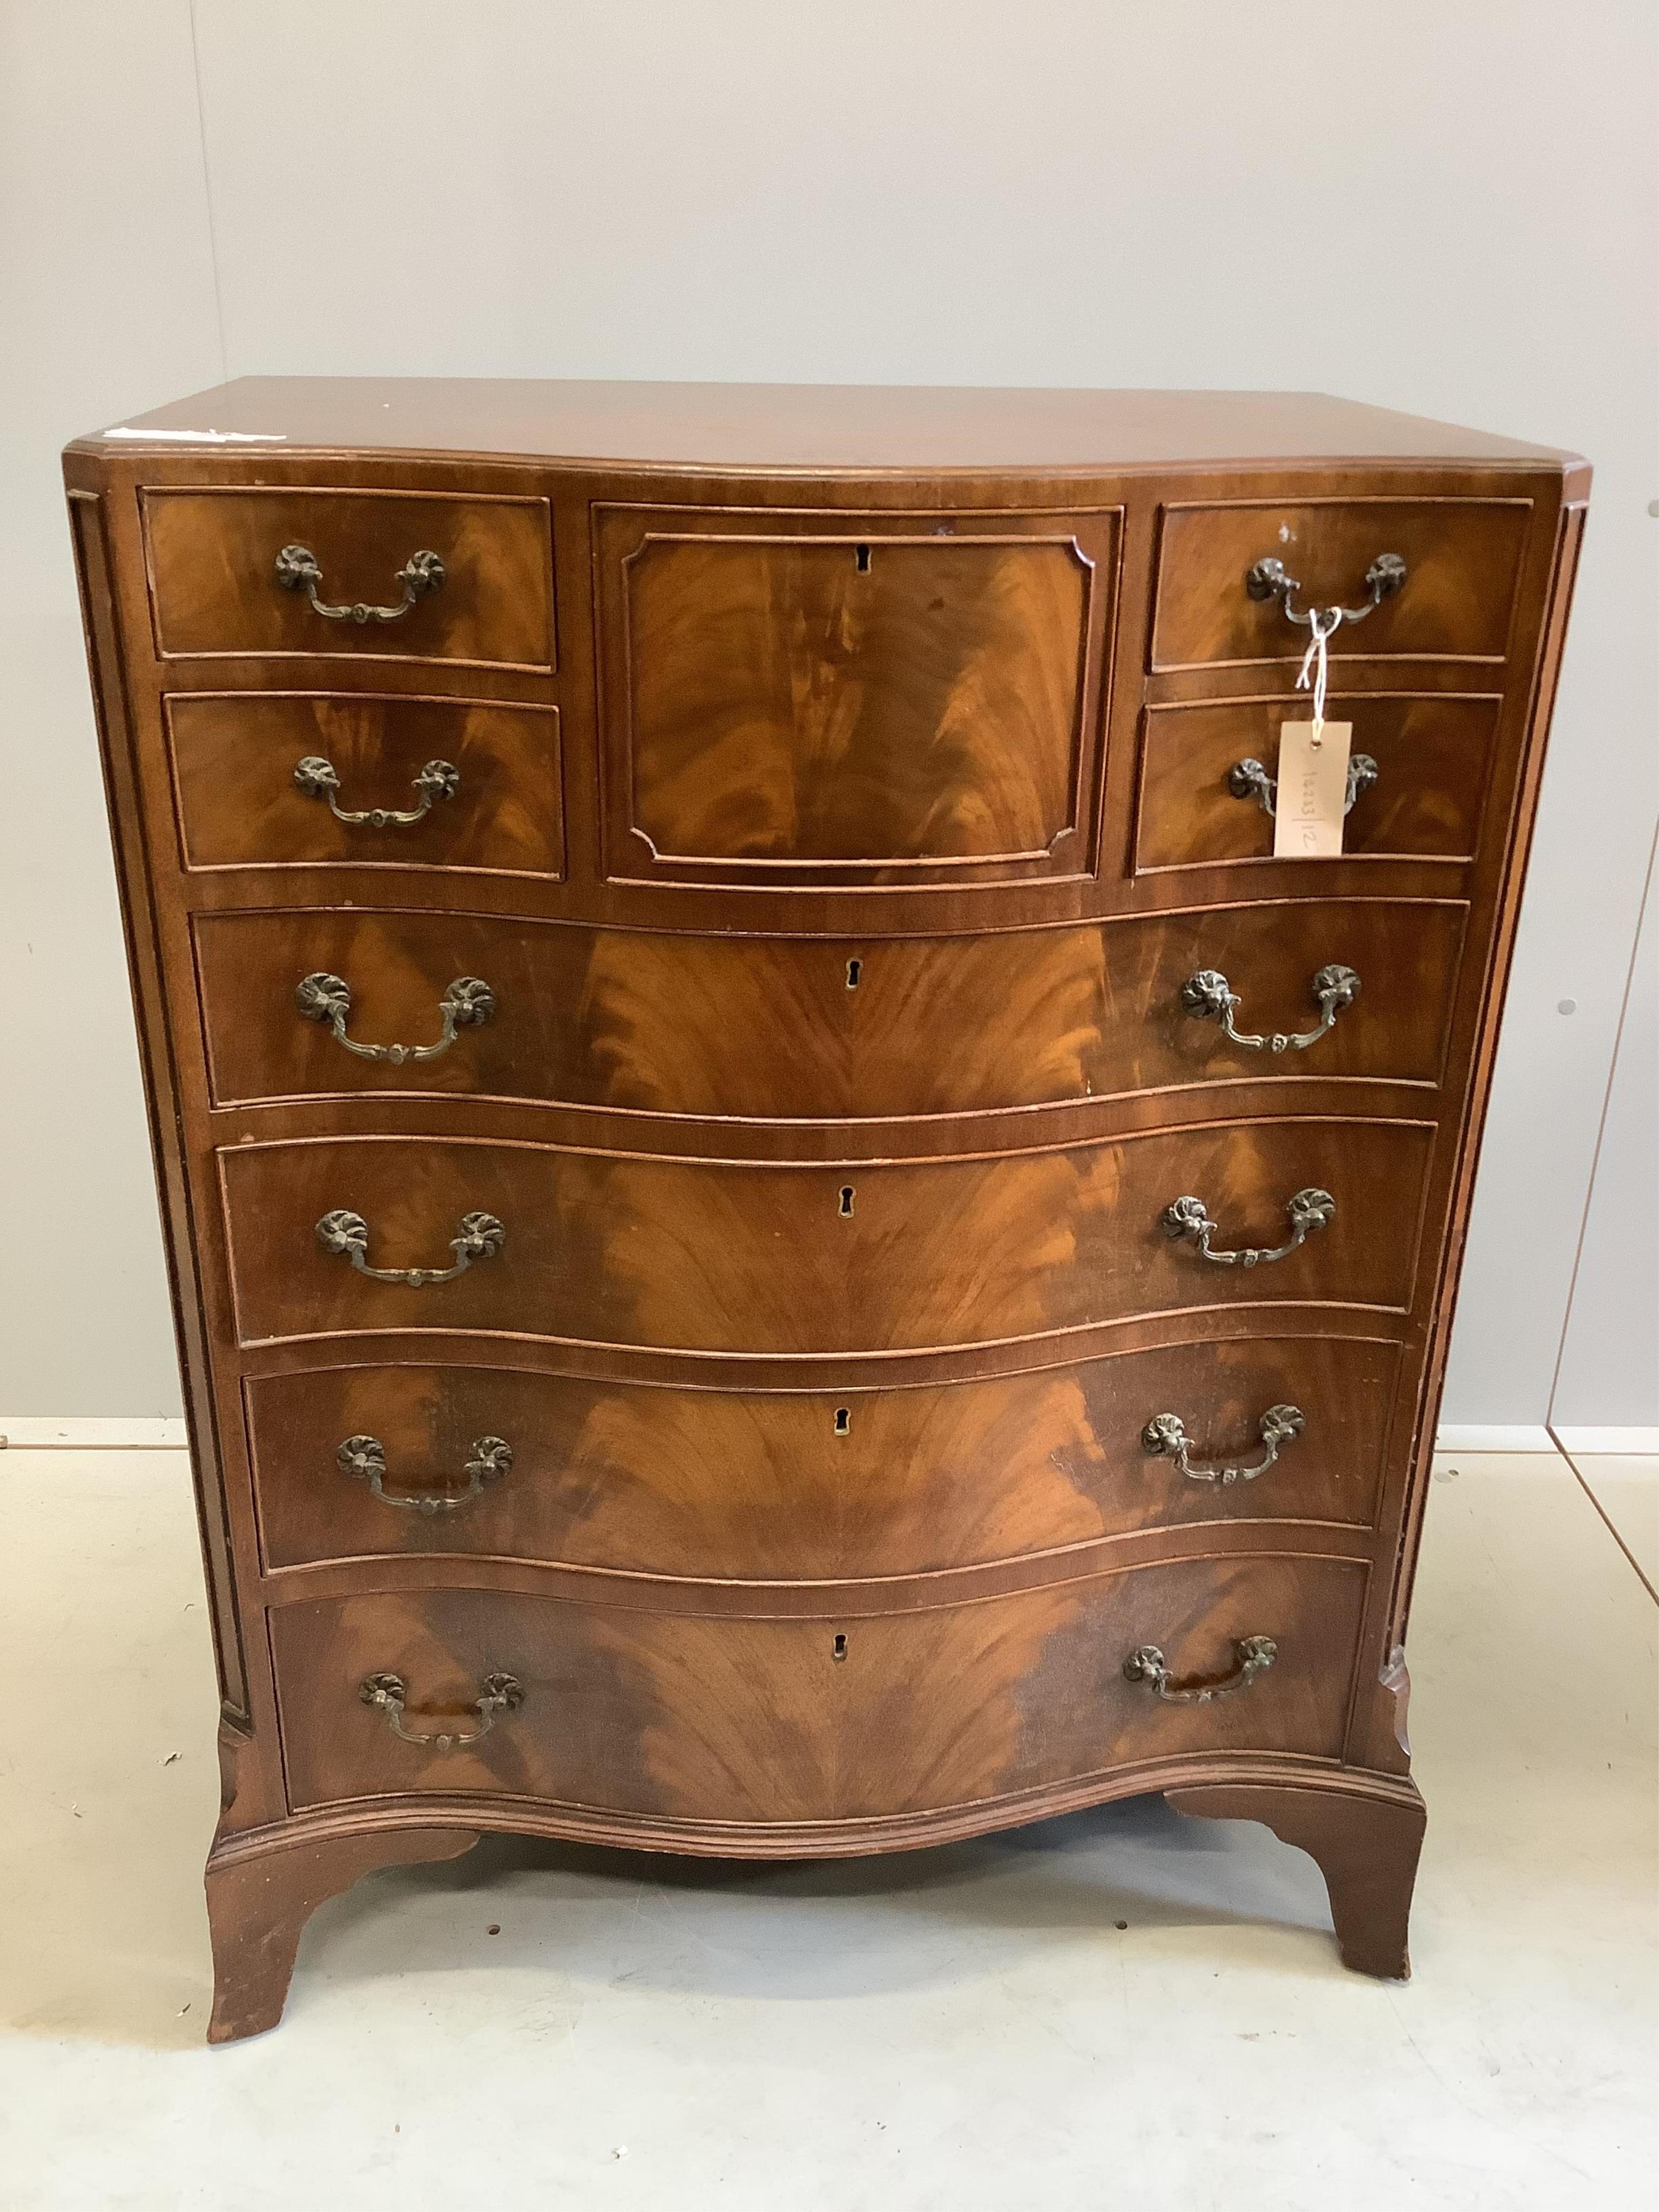 A reproduction George III style mahogany serpentine chest of nine drawers, width 76cm, depth 51cm, height 98cm. Condition - fair